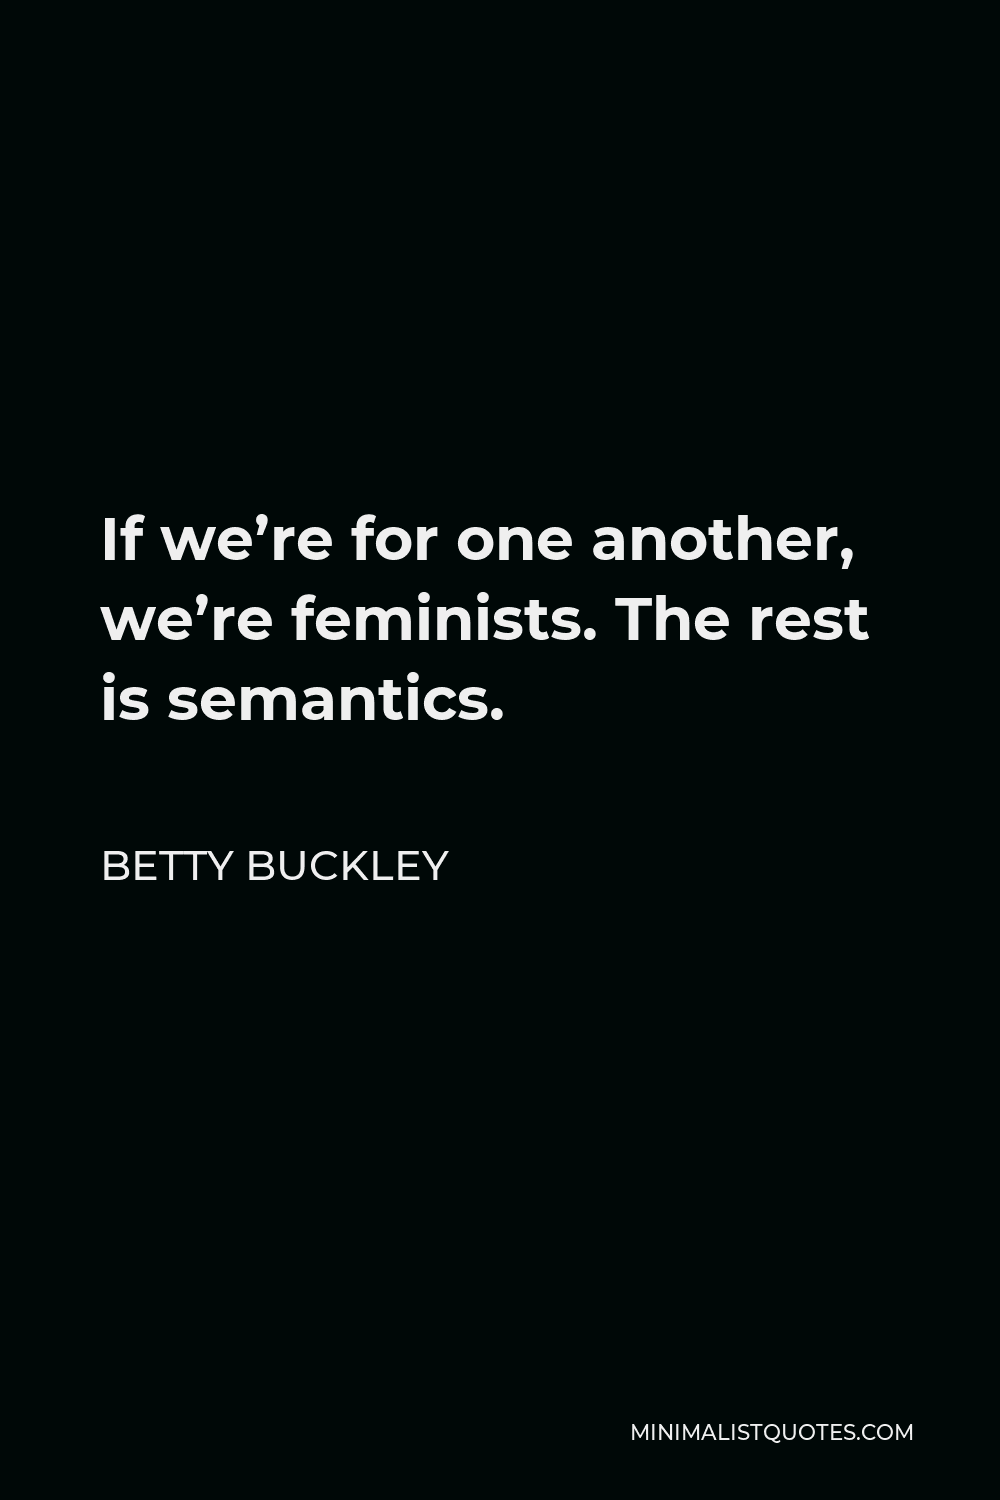 Betty Buckley Quote - If we’re for one another, we’re feminists. The rest is semantics.